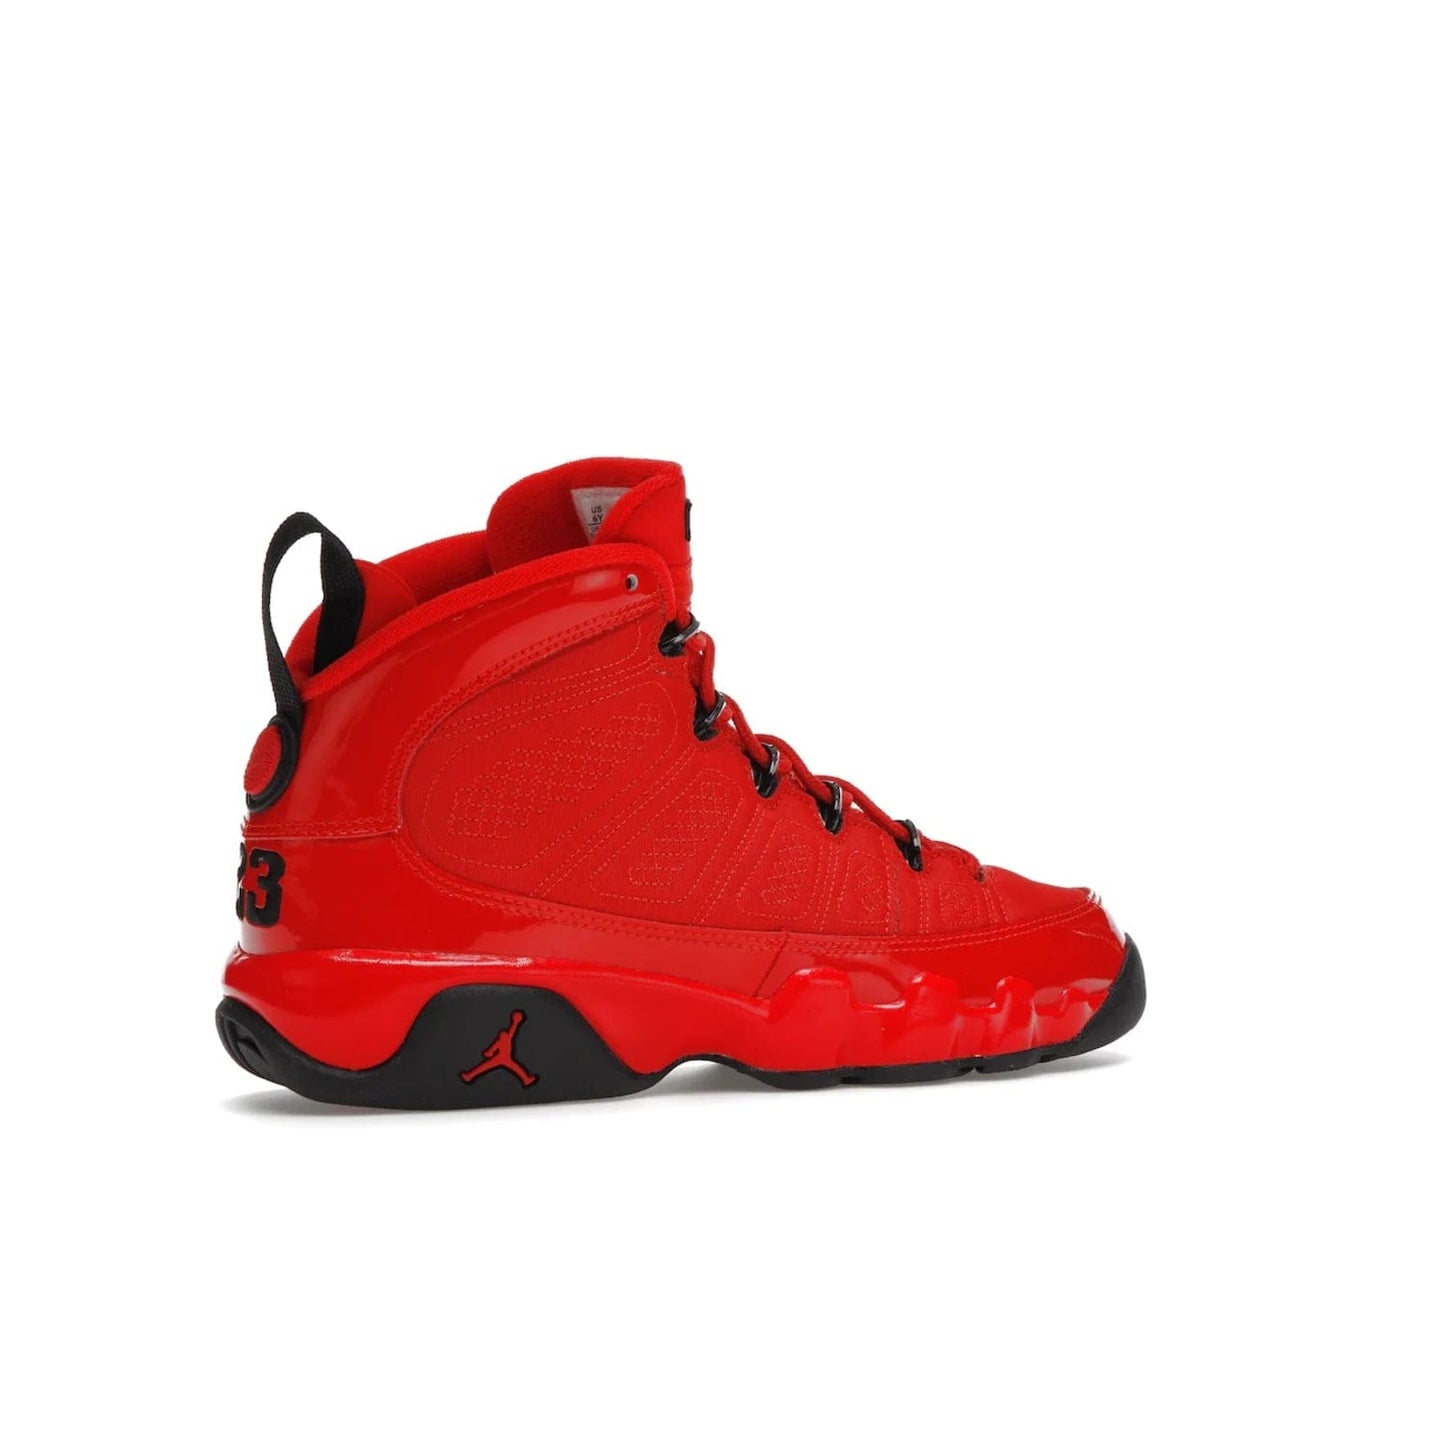 Jordan 9 Retro Chile Red (GS) - Image 34 - Only at www.BallersClubKickz.com - Introducing the Air Jordan 9 Retro Chile Red (GS), a vintage 1993 silhouette with fiery colorway. Features quilted side paneling, glossy patent leather, pull tabs, black contrast accents, and foam midsole. Launching May 2022 for $140.